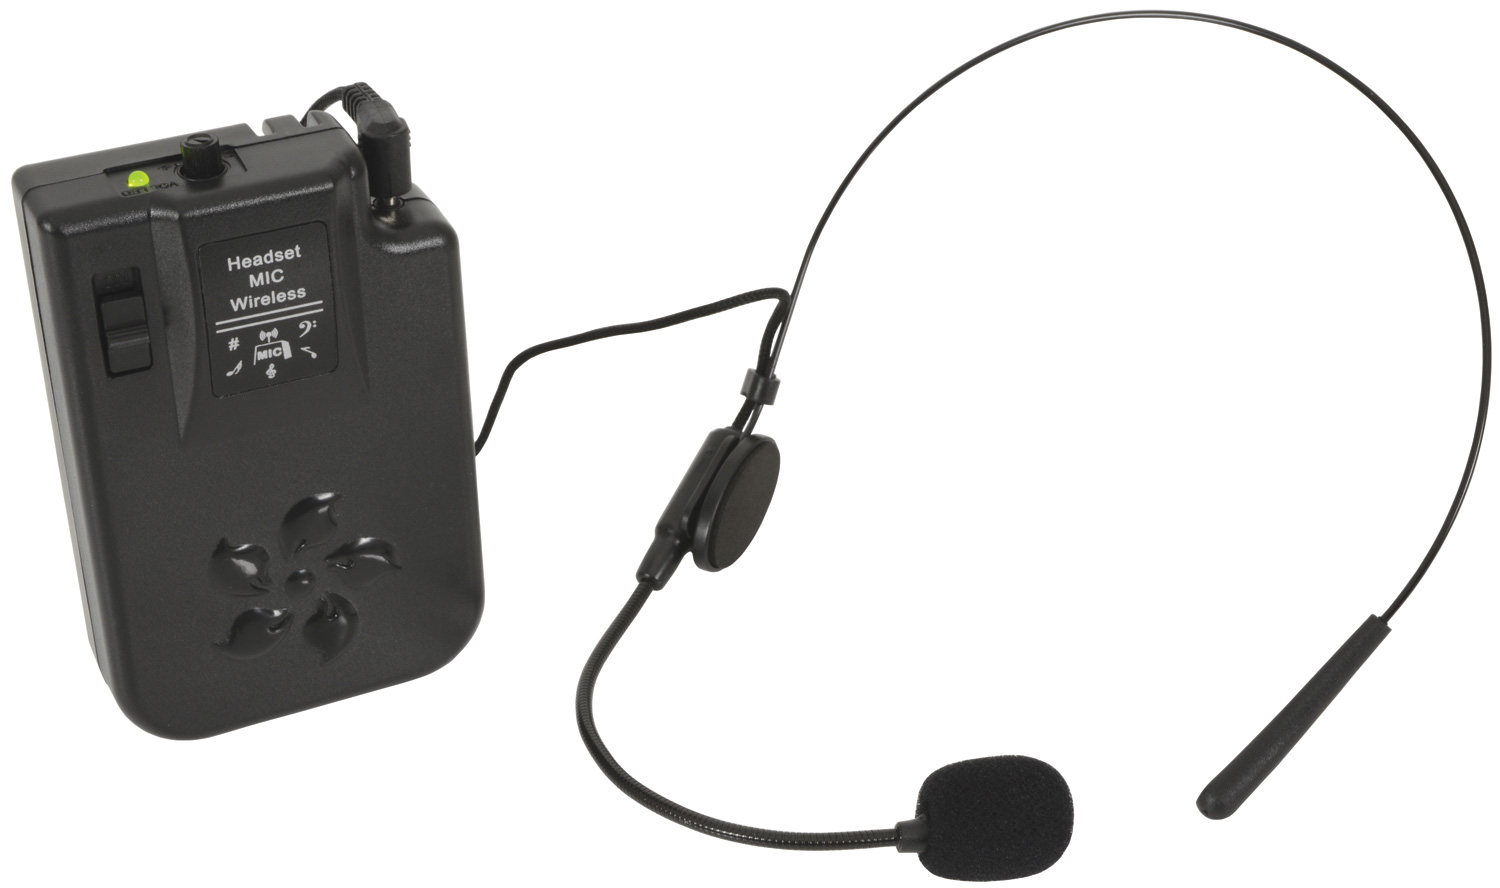 Headset Microphone for Busker, Quest & PAL portable PA units Headset for Busker, Quest & PAL - 175.0MHz